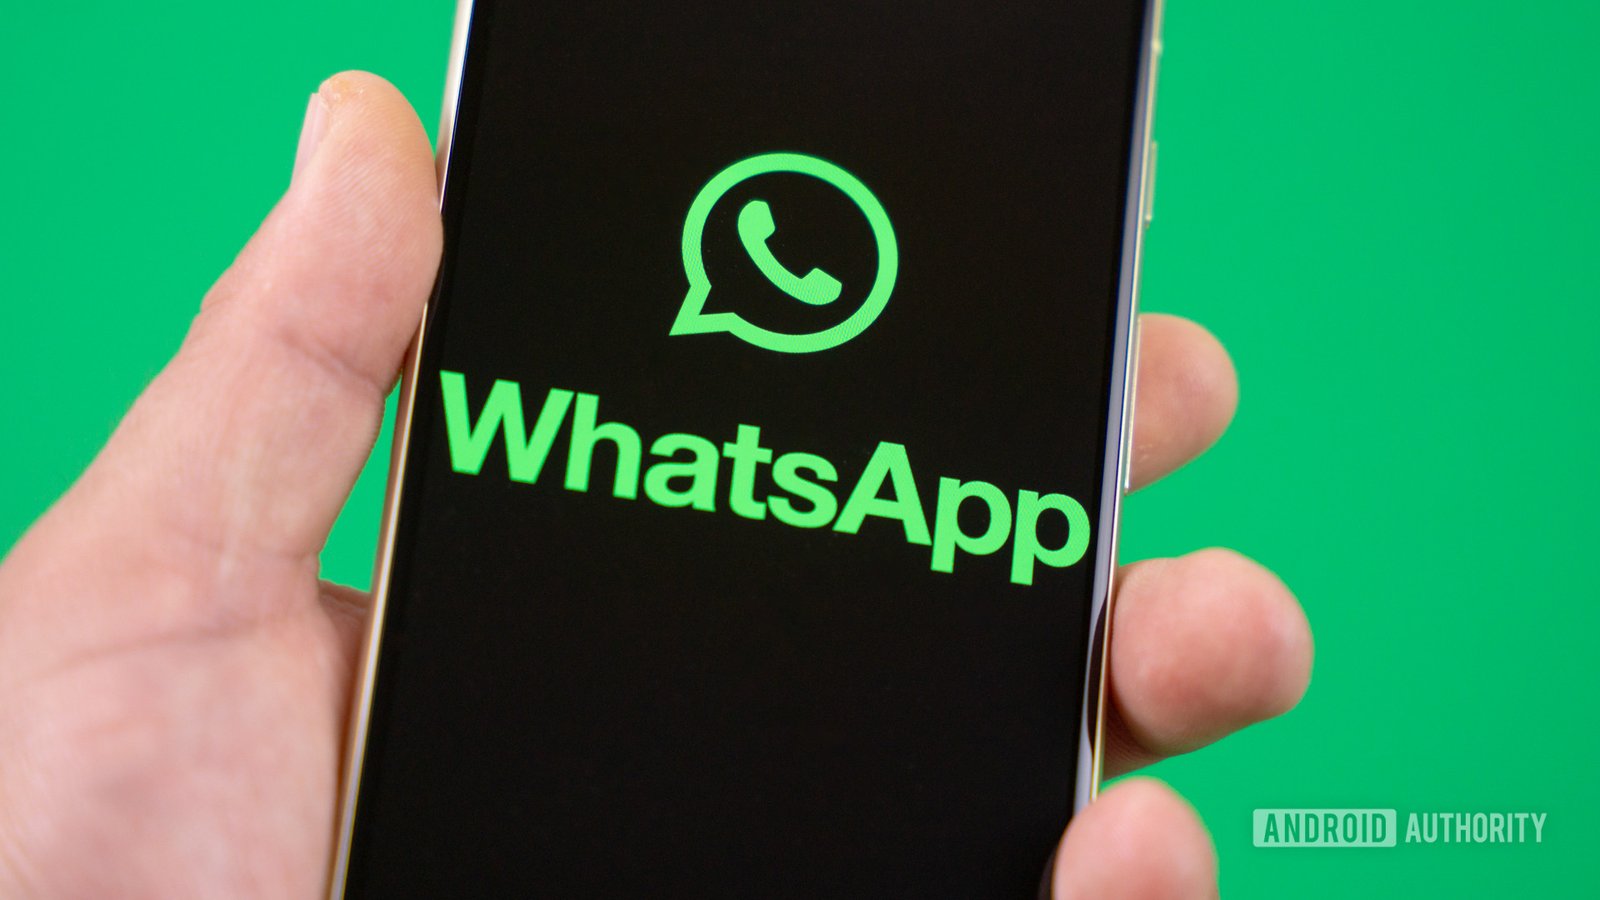 Here’s how WhatsApp and Messenger will become interoperable with other messaging apps